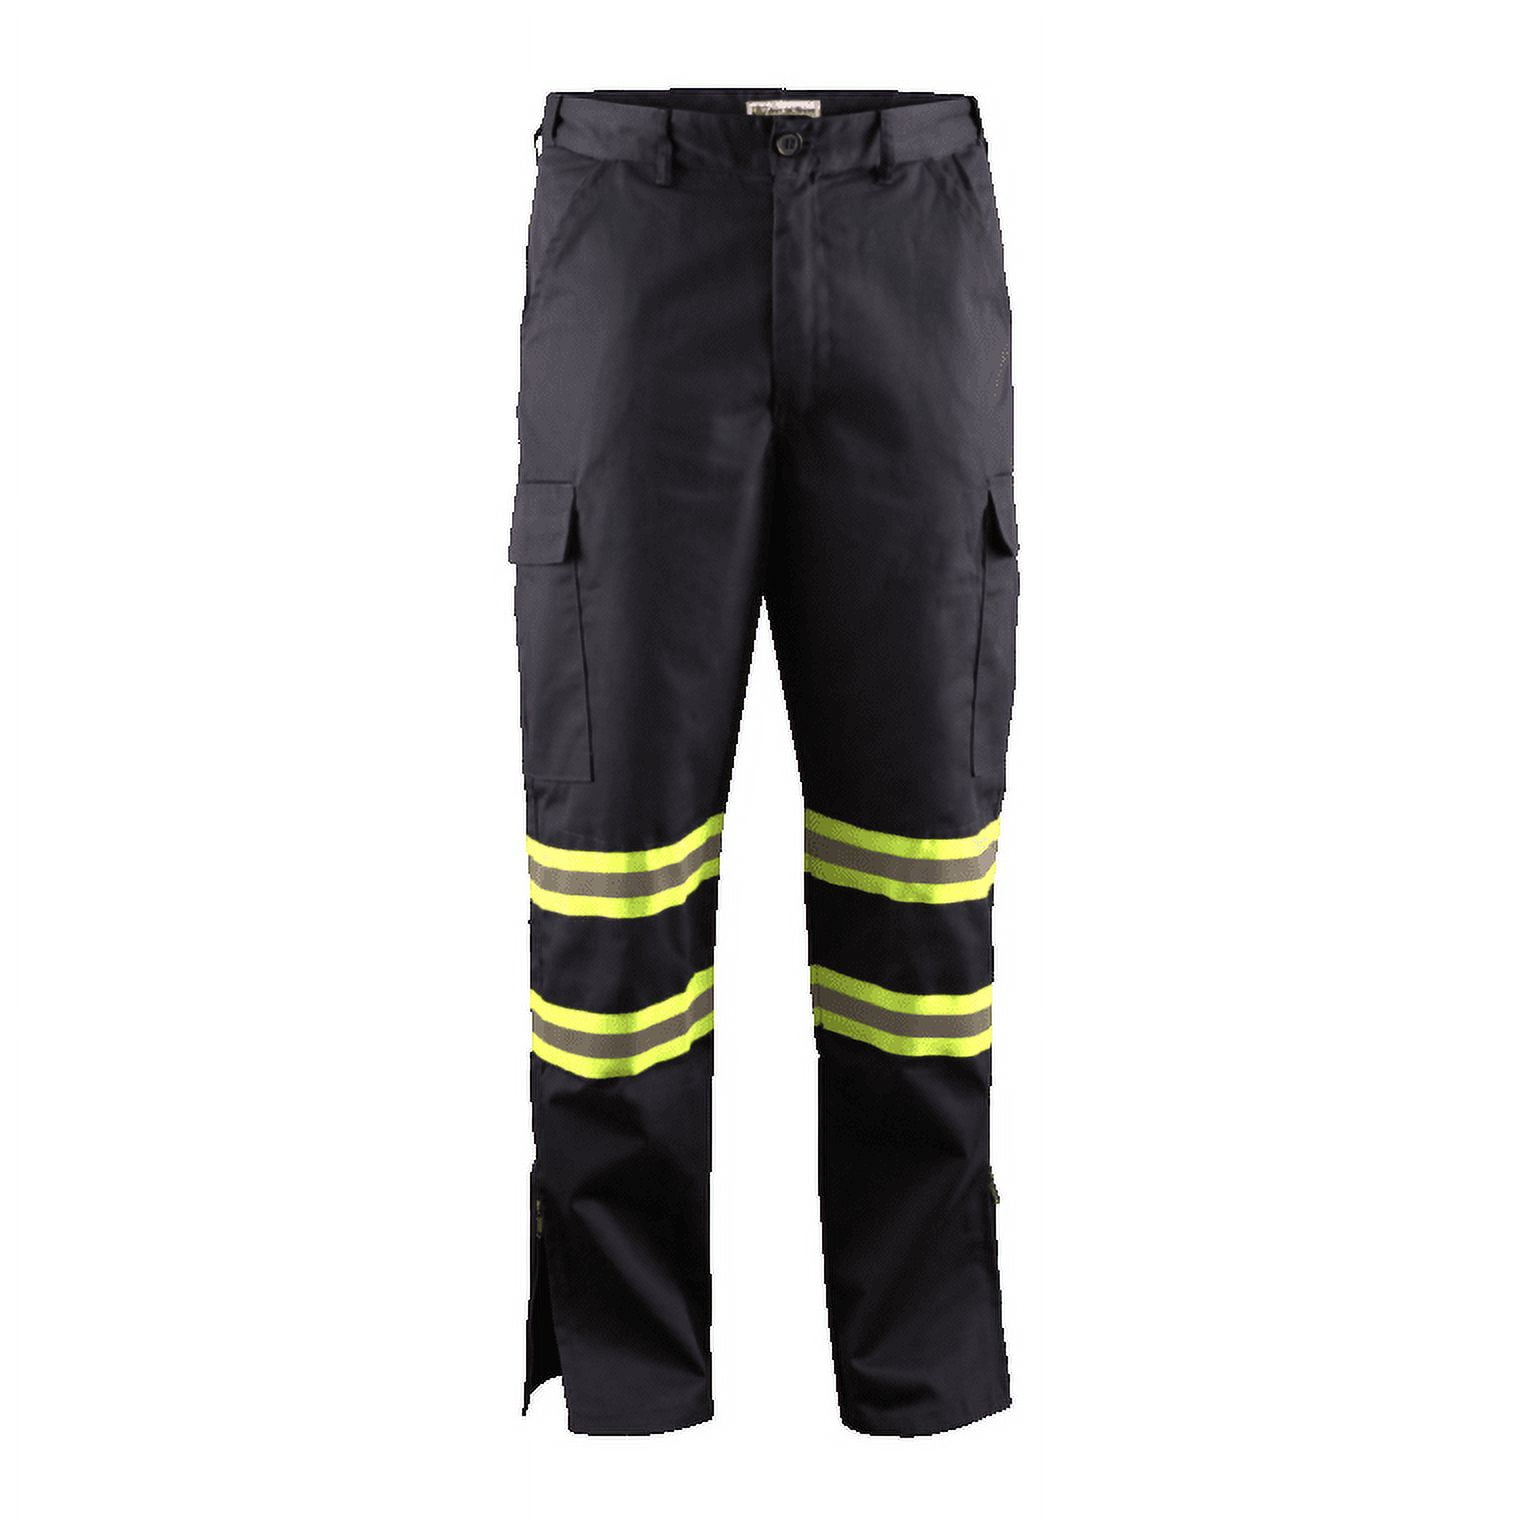 Stretch Work Trousers Holster Pockets, High-Vis Class 2 | Snickers Workwear